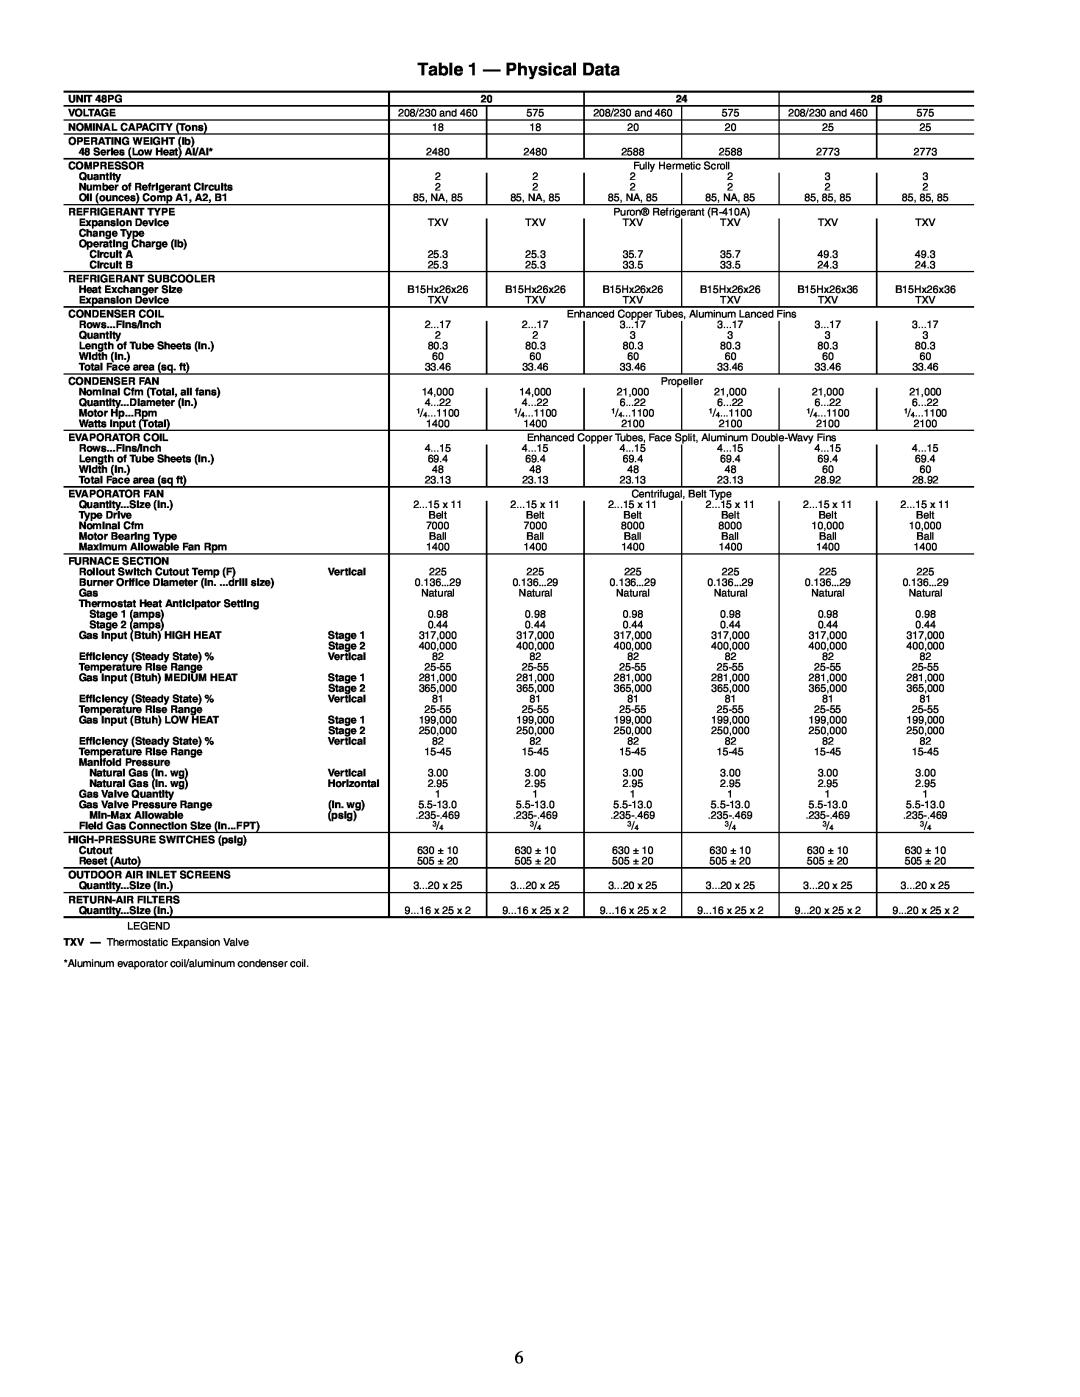 Carrier 48PG20-28 specifications Physical Data 